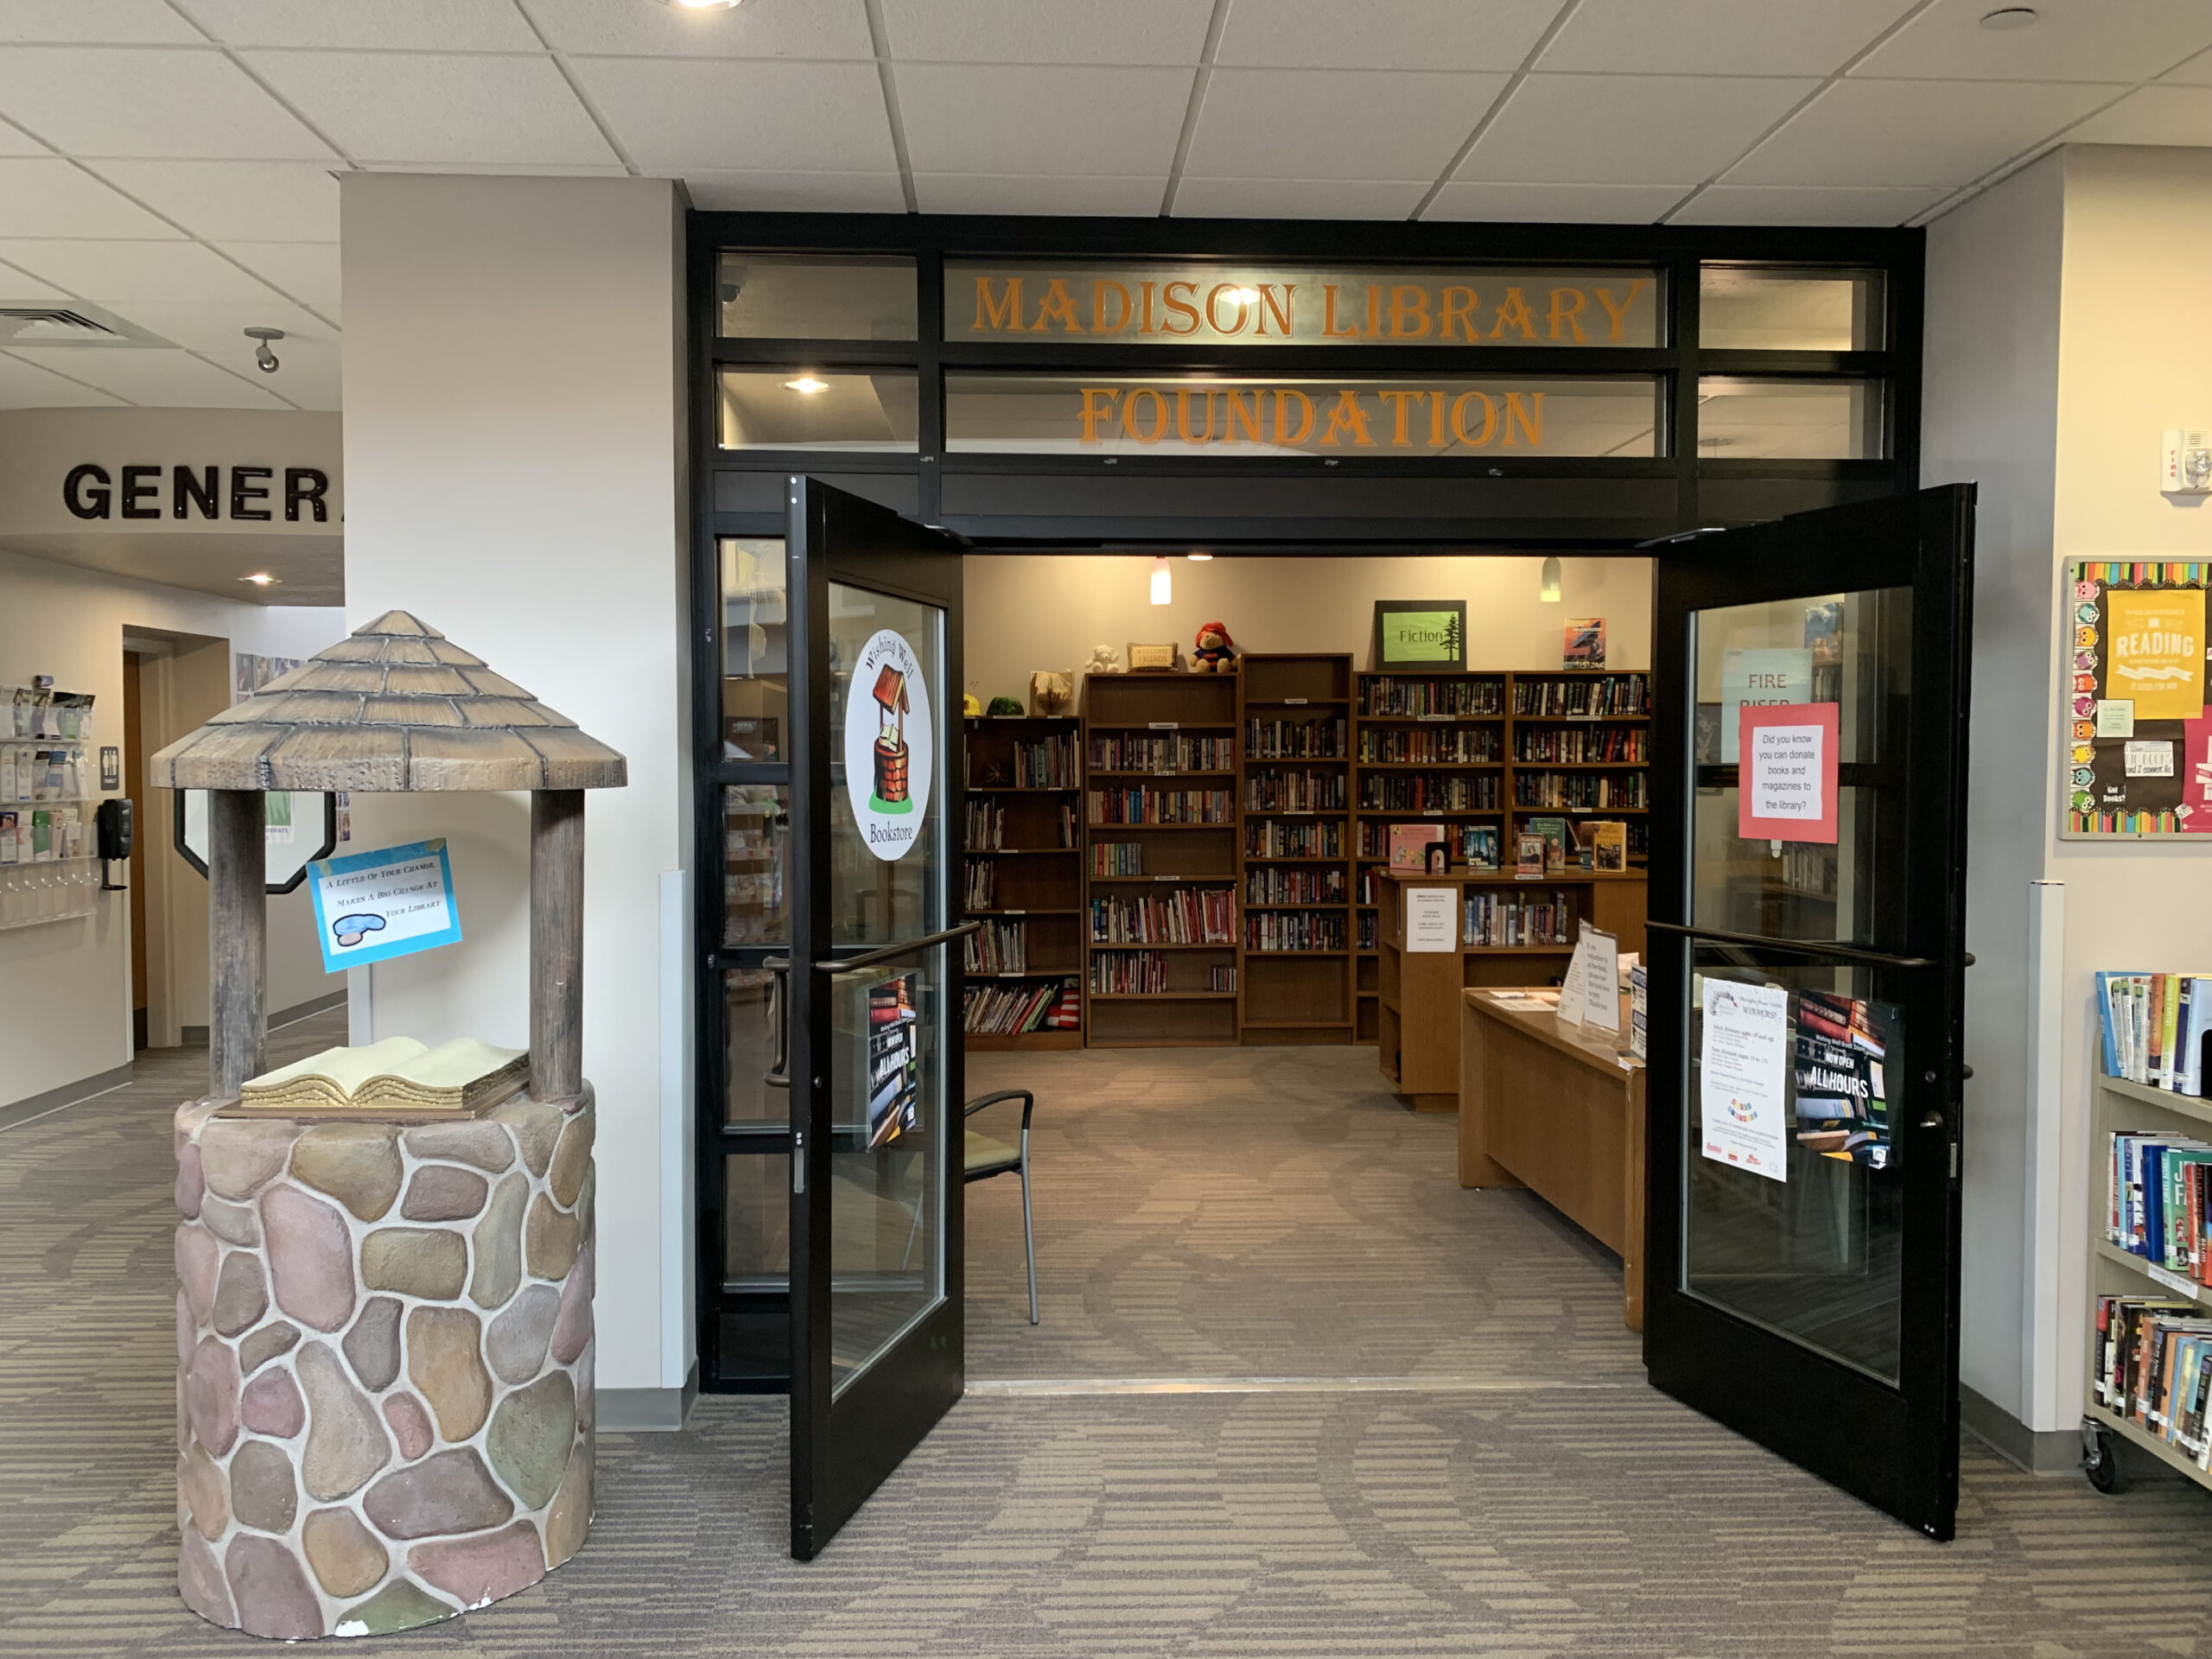 The Wishing Well Bookstore - Maintained by the Madison Library Foundation